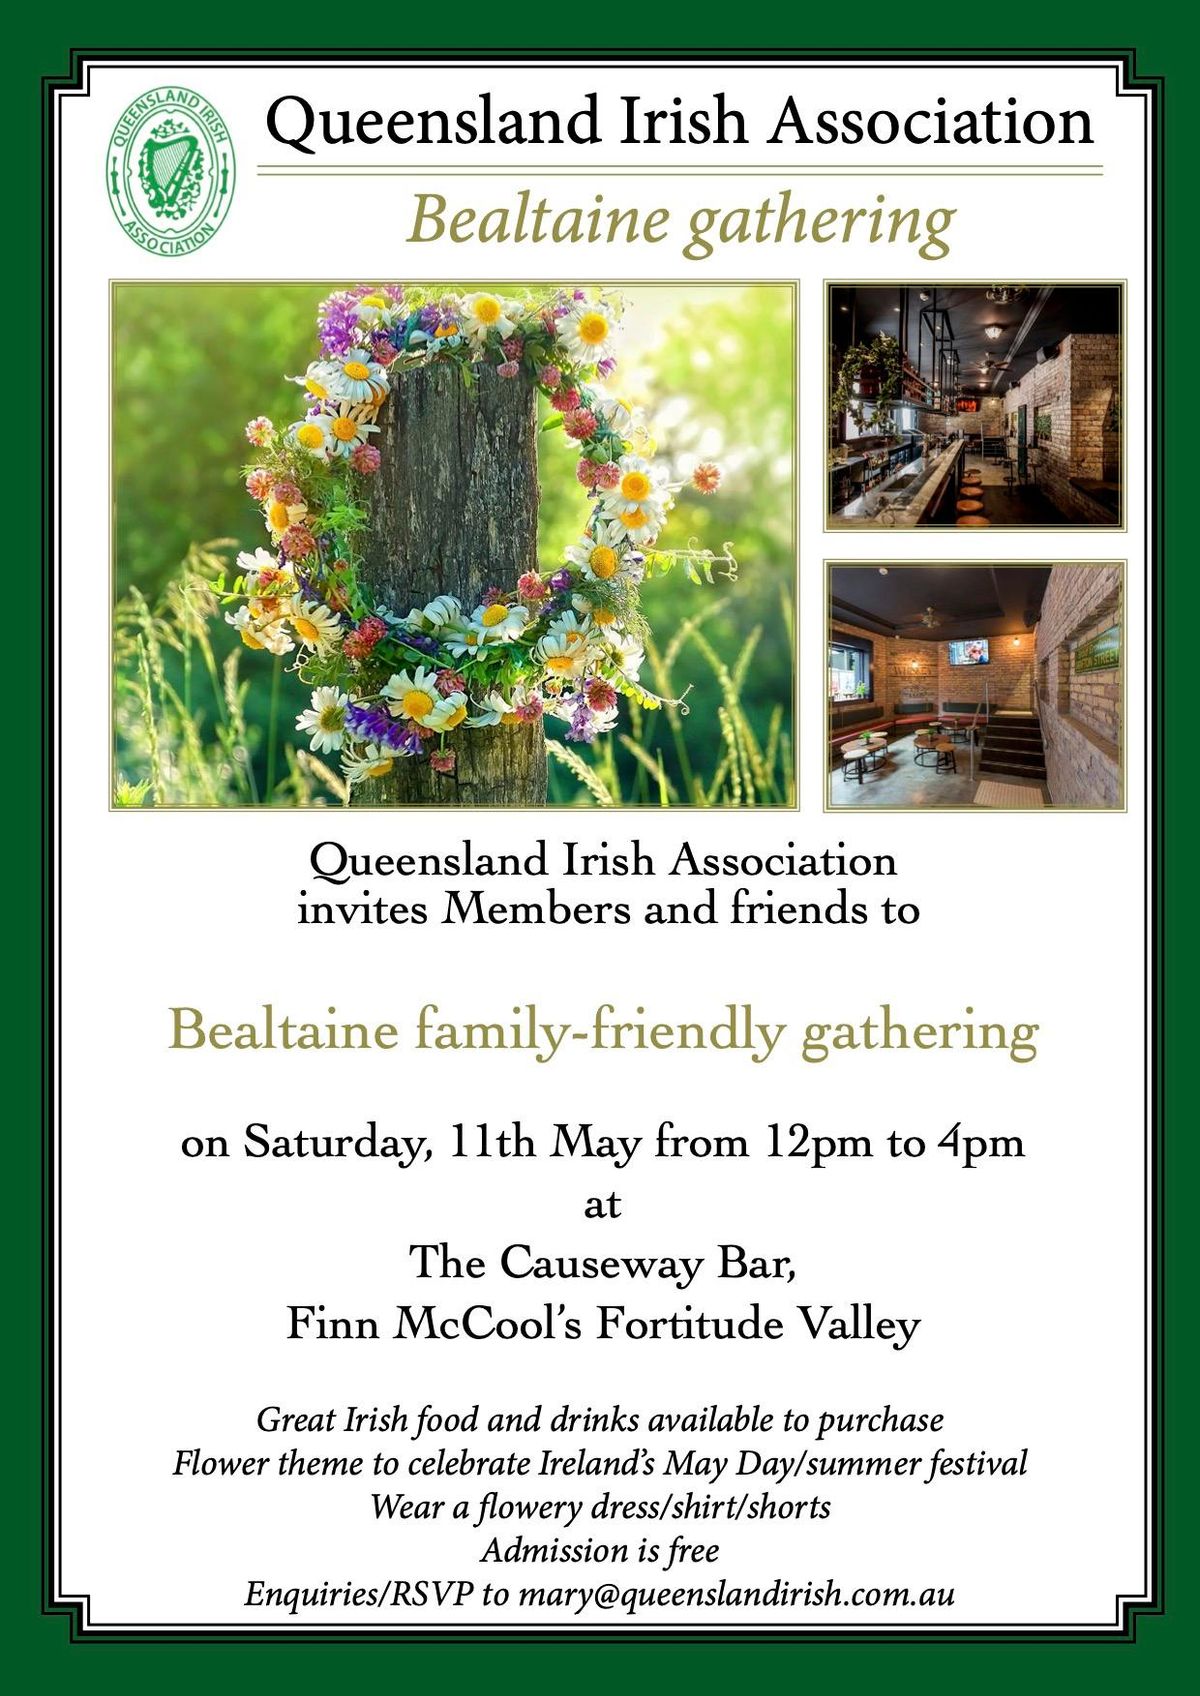 Bealtaine family-friendly gathering